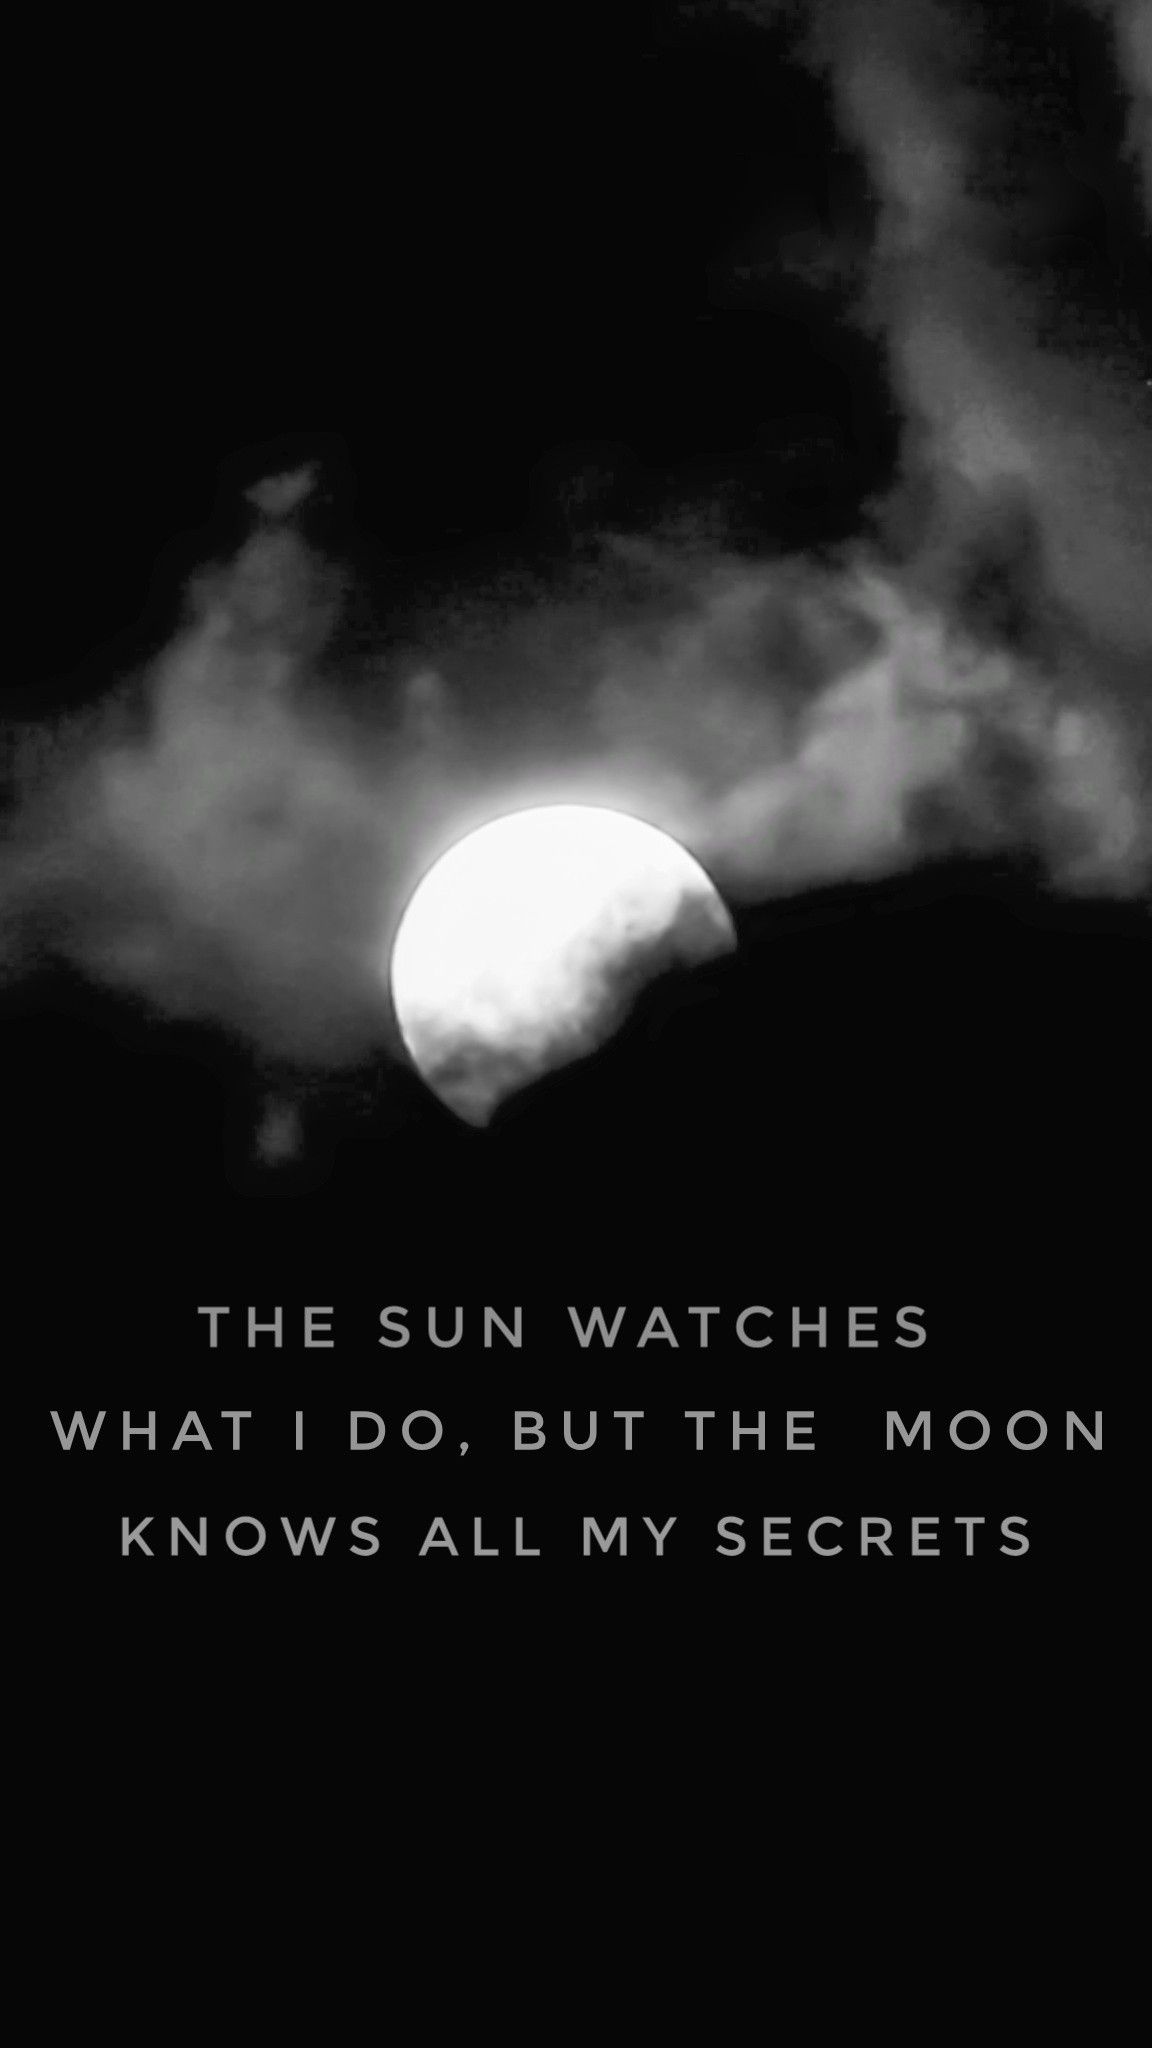 Instagram, The sun watches what i do, but the moon knows all my secret. #sun #moon #quotes #w. Best quotes wallpaper, Wallpaper quotes, Dark words